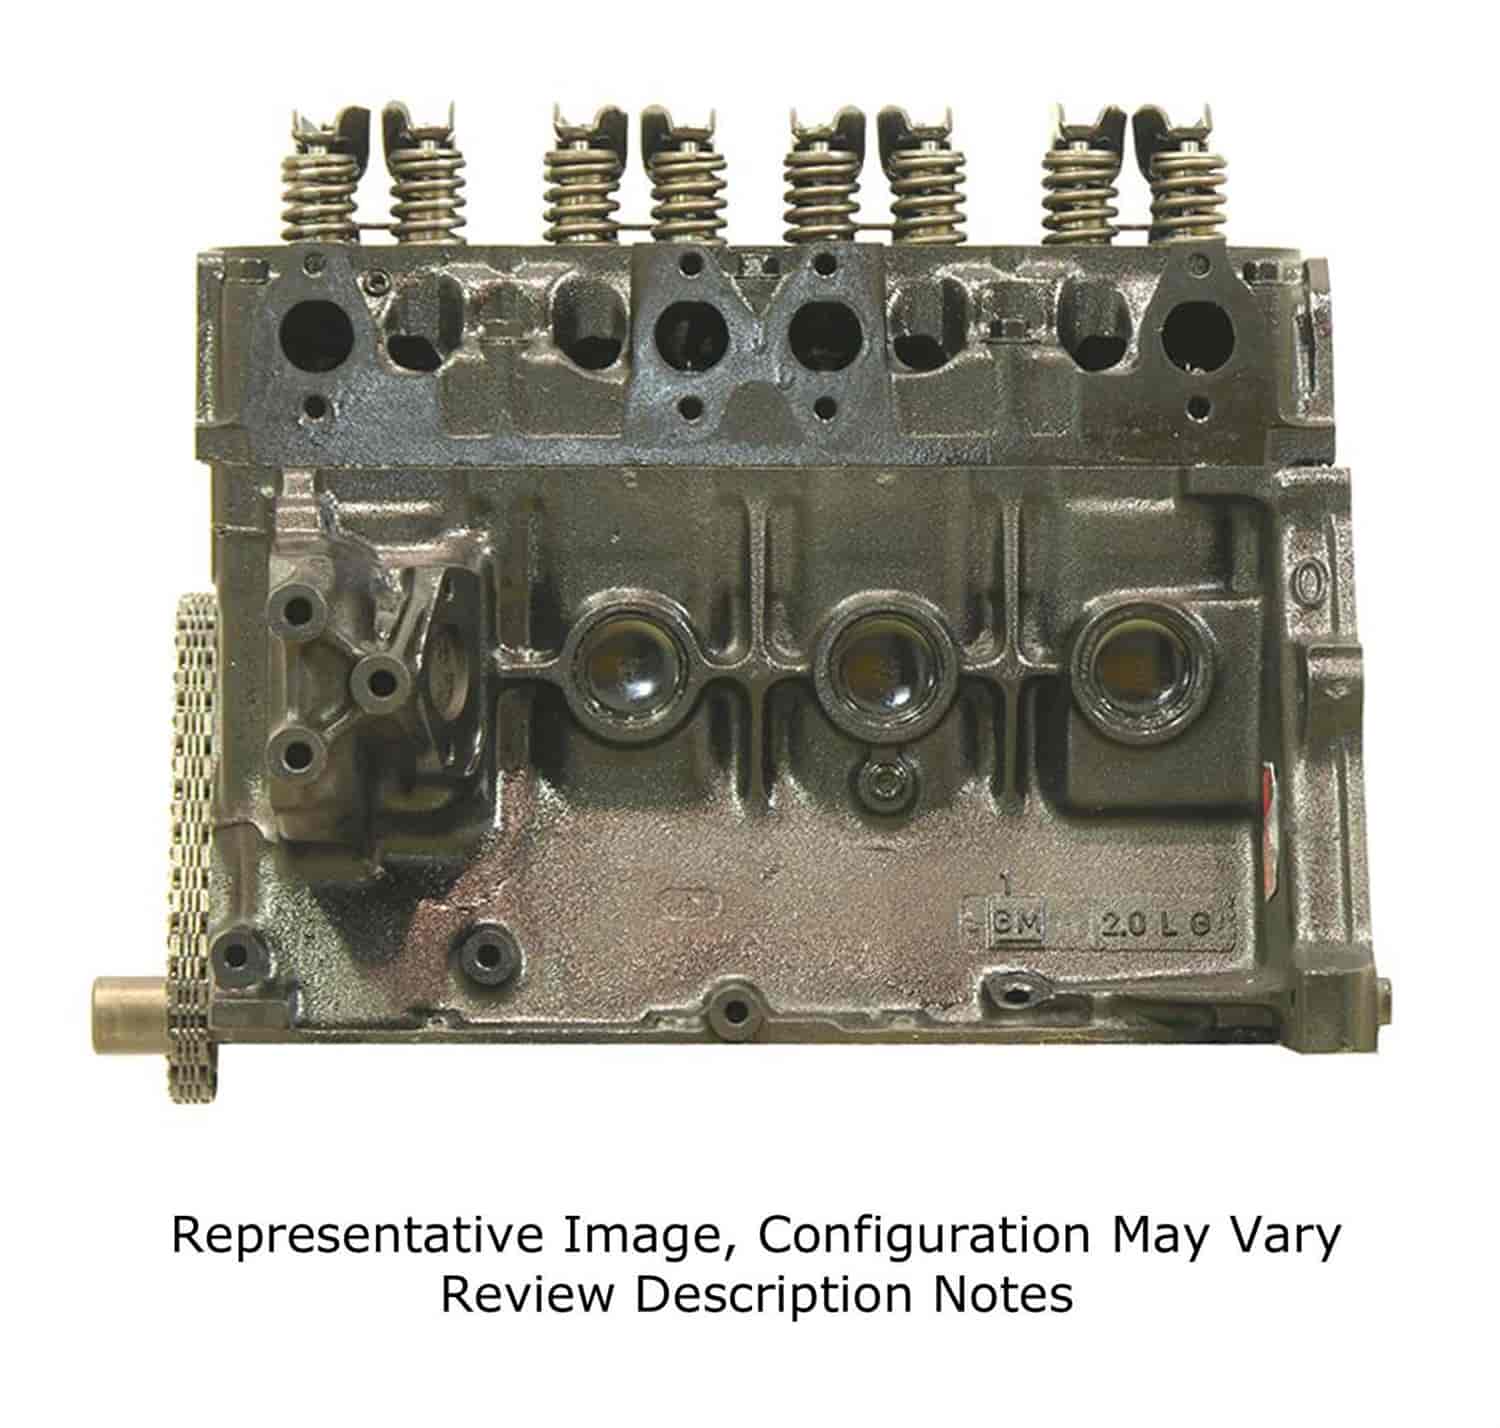 Remanufactured Crate Engine for 1984-1986 Chevy/Cadillac/Buick/Olds/Pontiac Car with 2.0L L4